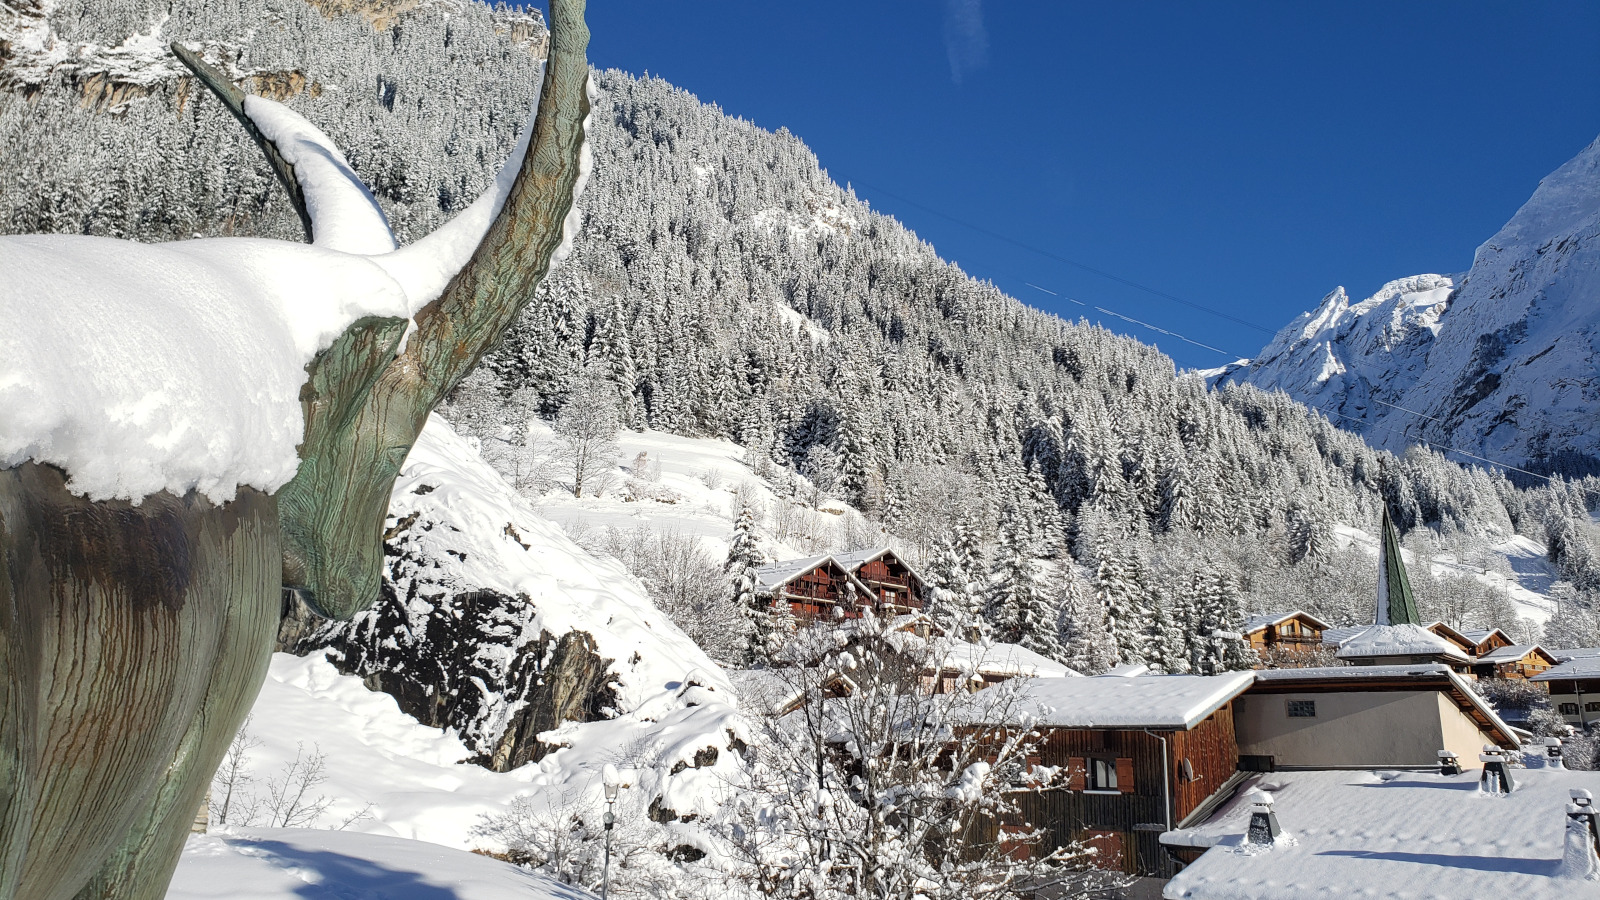 Ibex and village under the snow